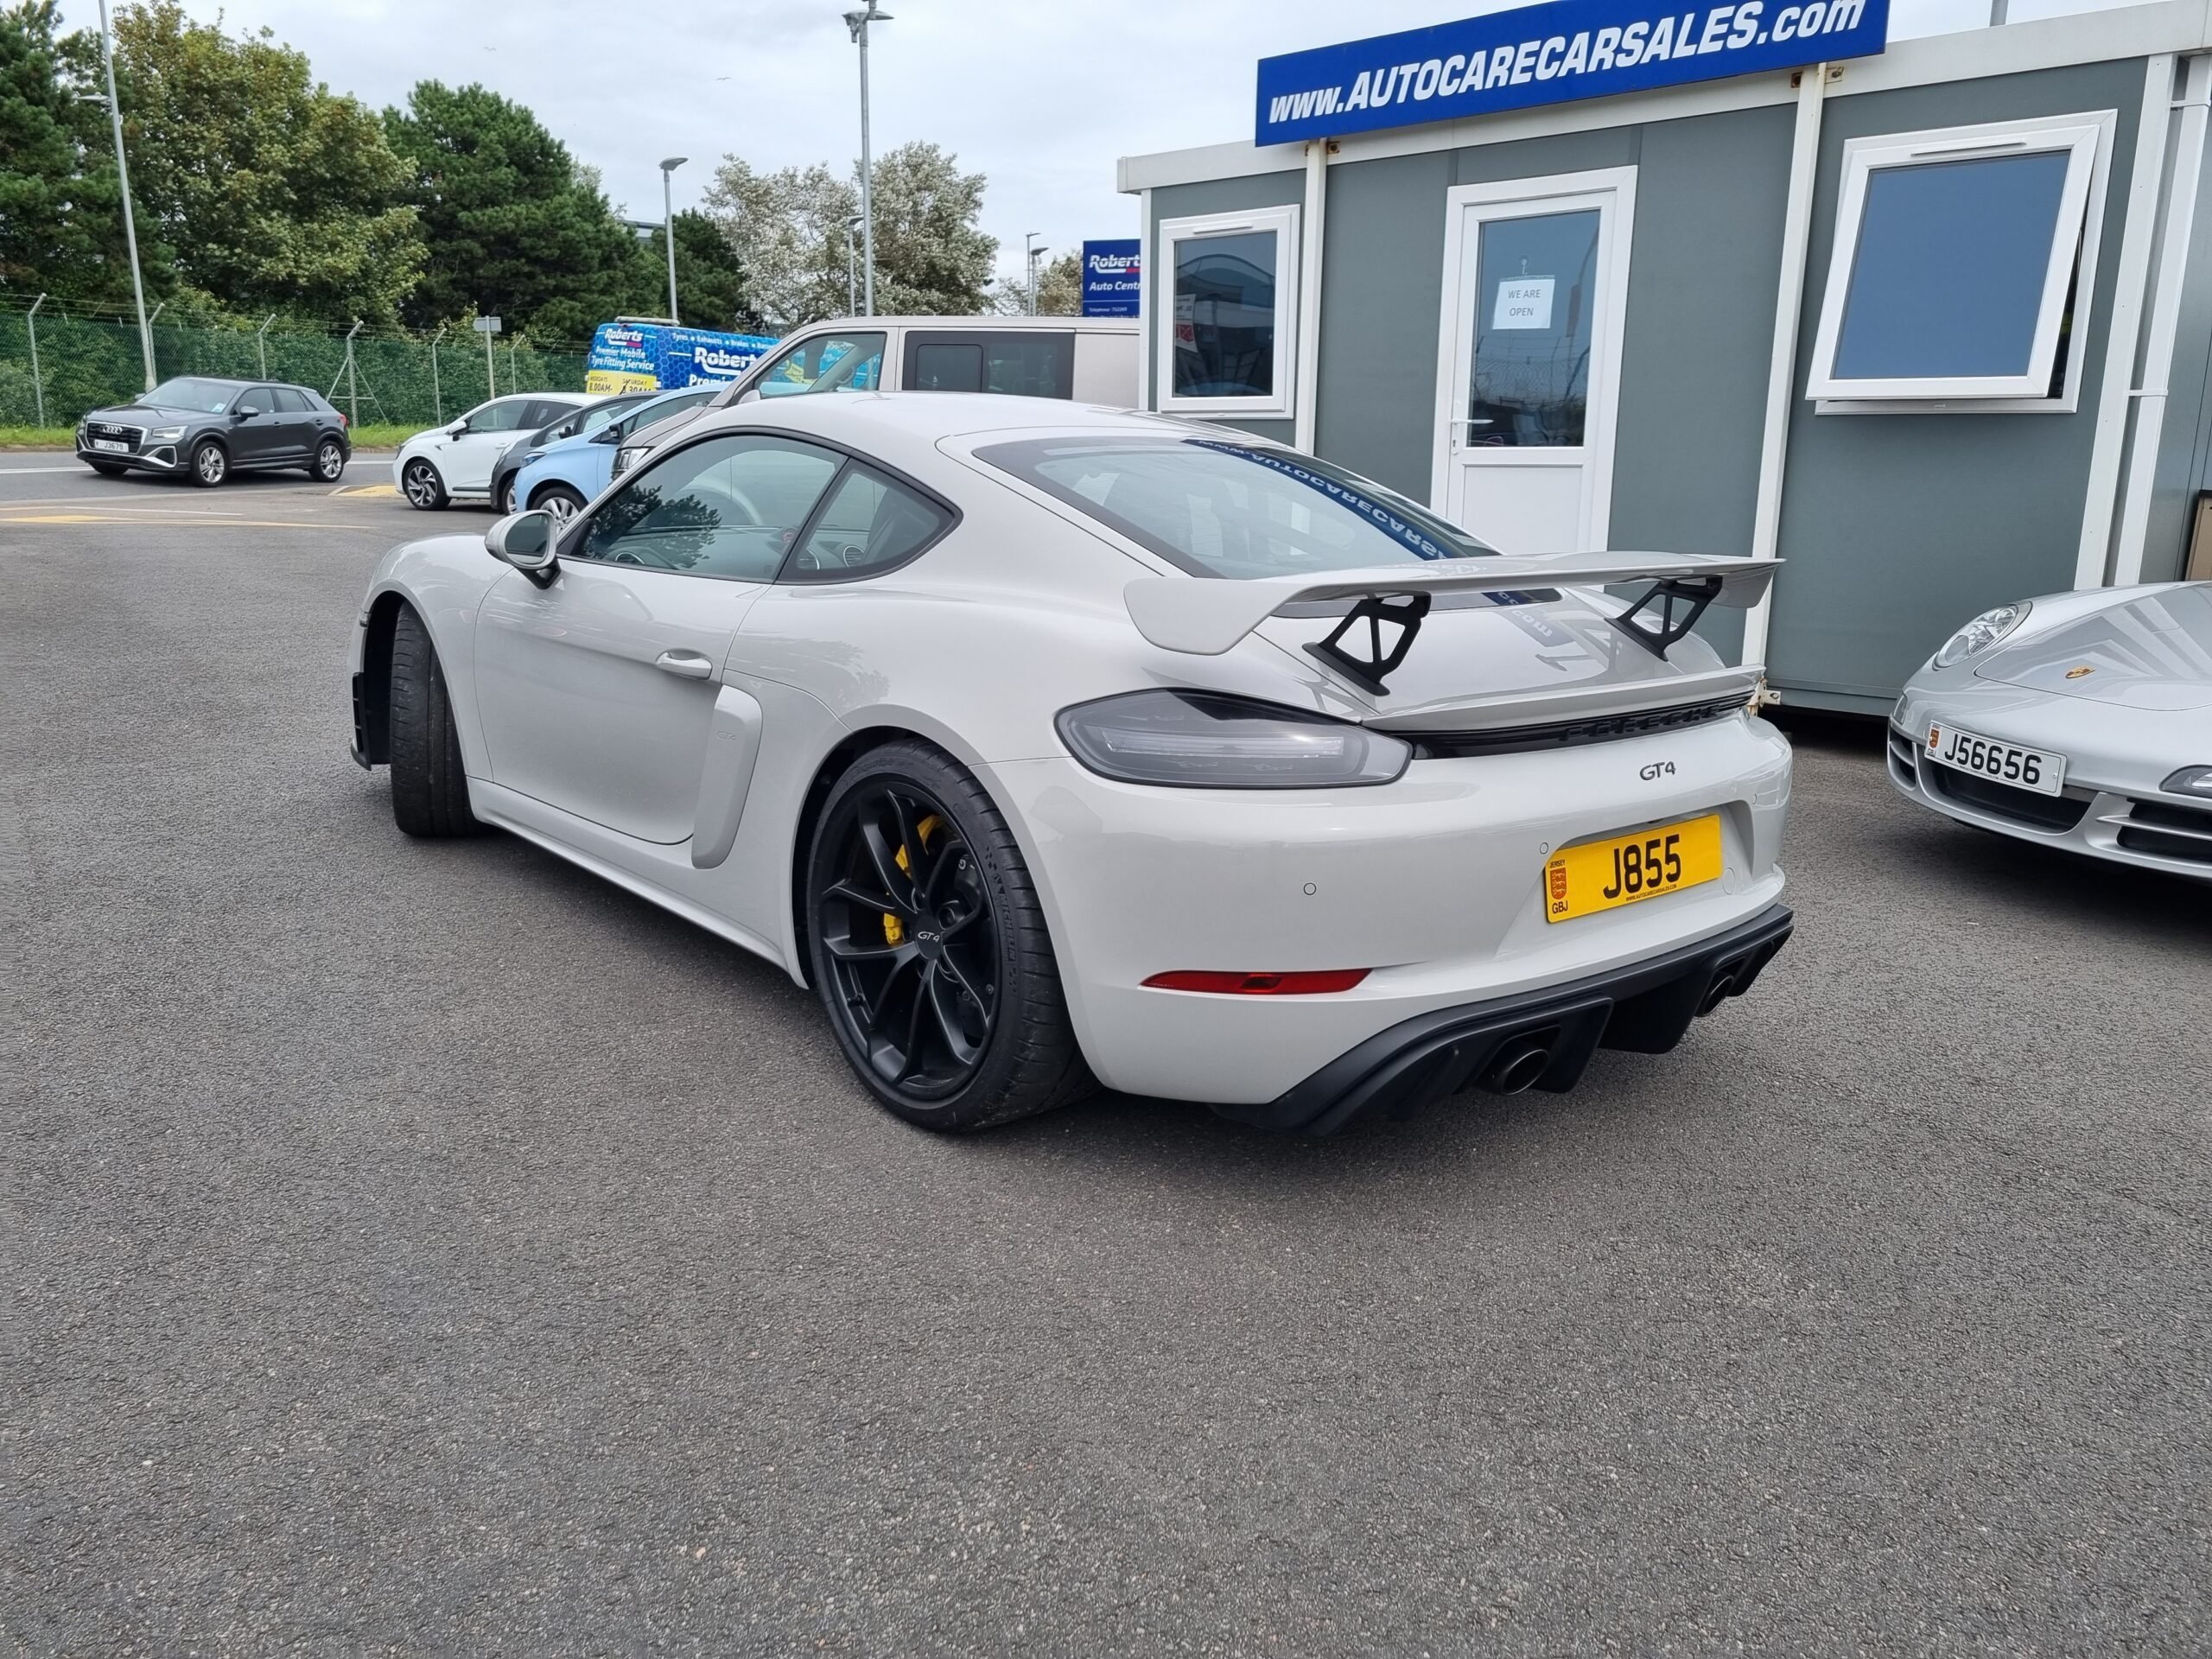 2020 Porsche Cayman Gt4 Club Sport 40 Coupe Only 1700 Miles18100 Worth Of Factory Options 7